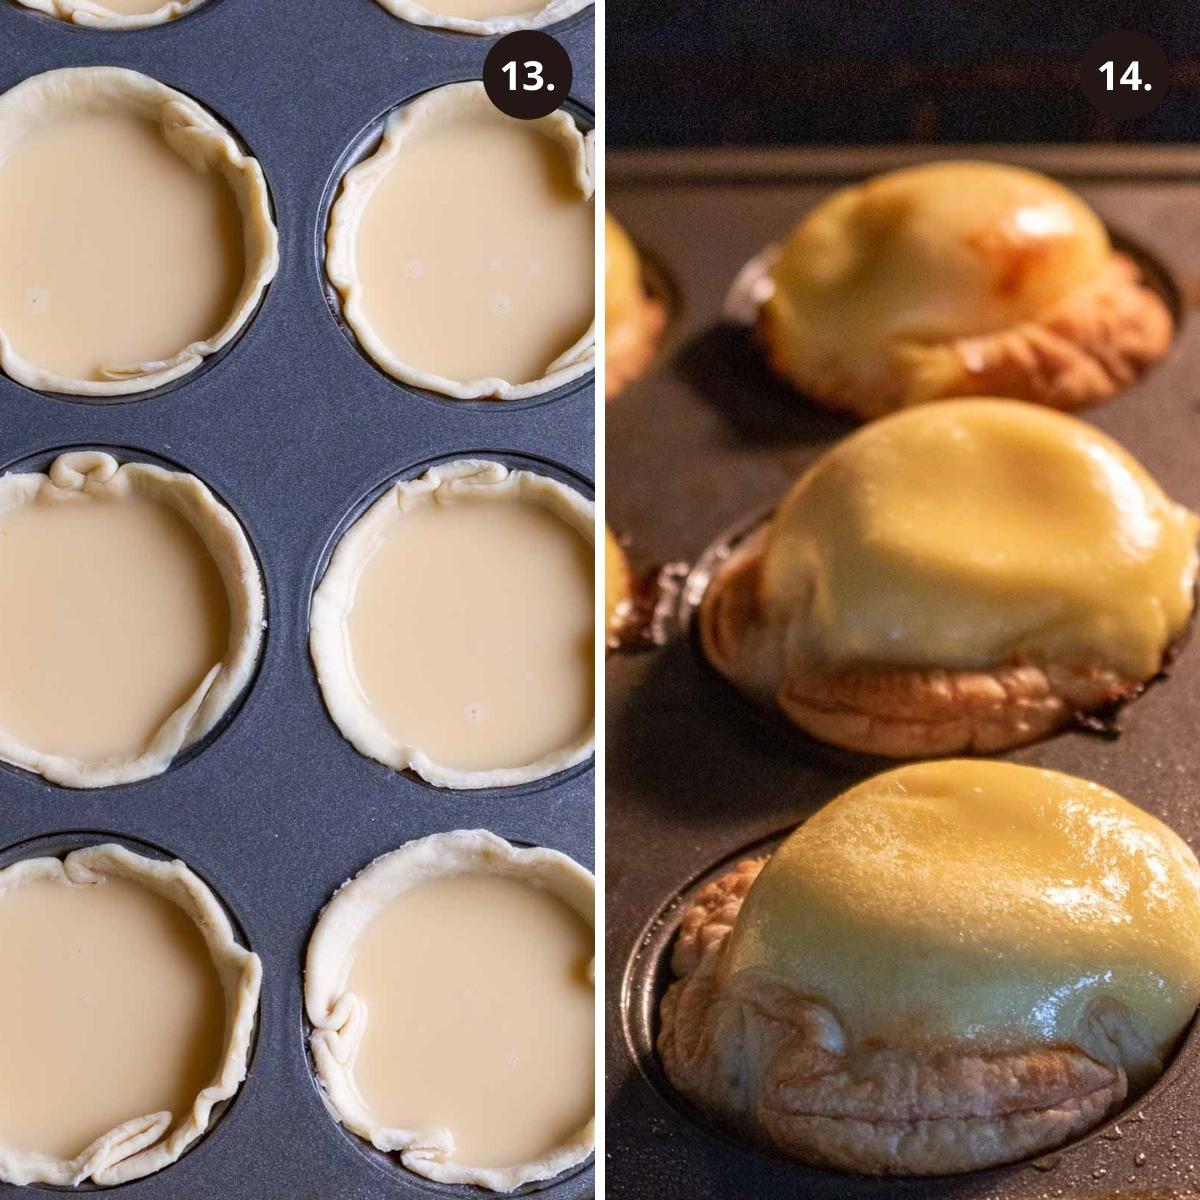 Egg custard poured into puff pastry dough shells and photo of egg tarts cooking in the oven.